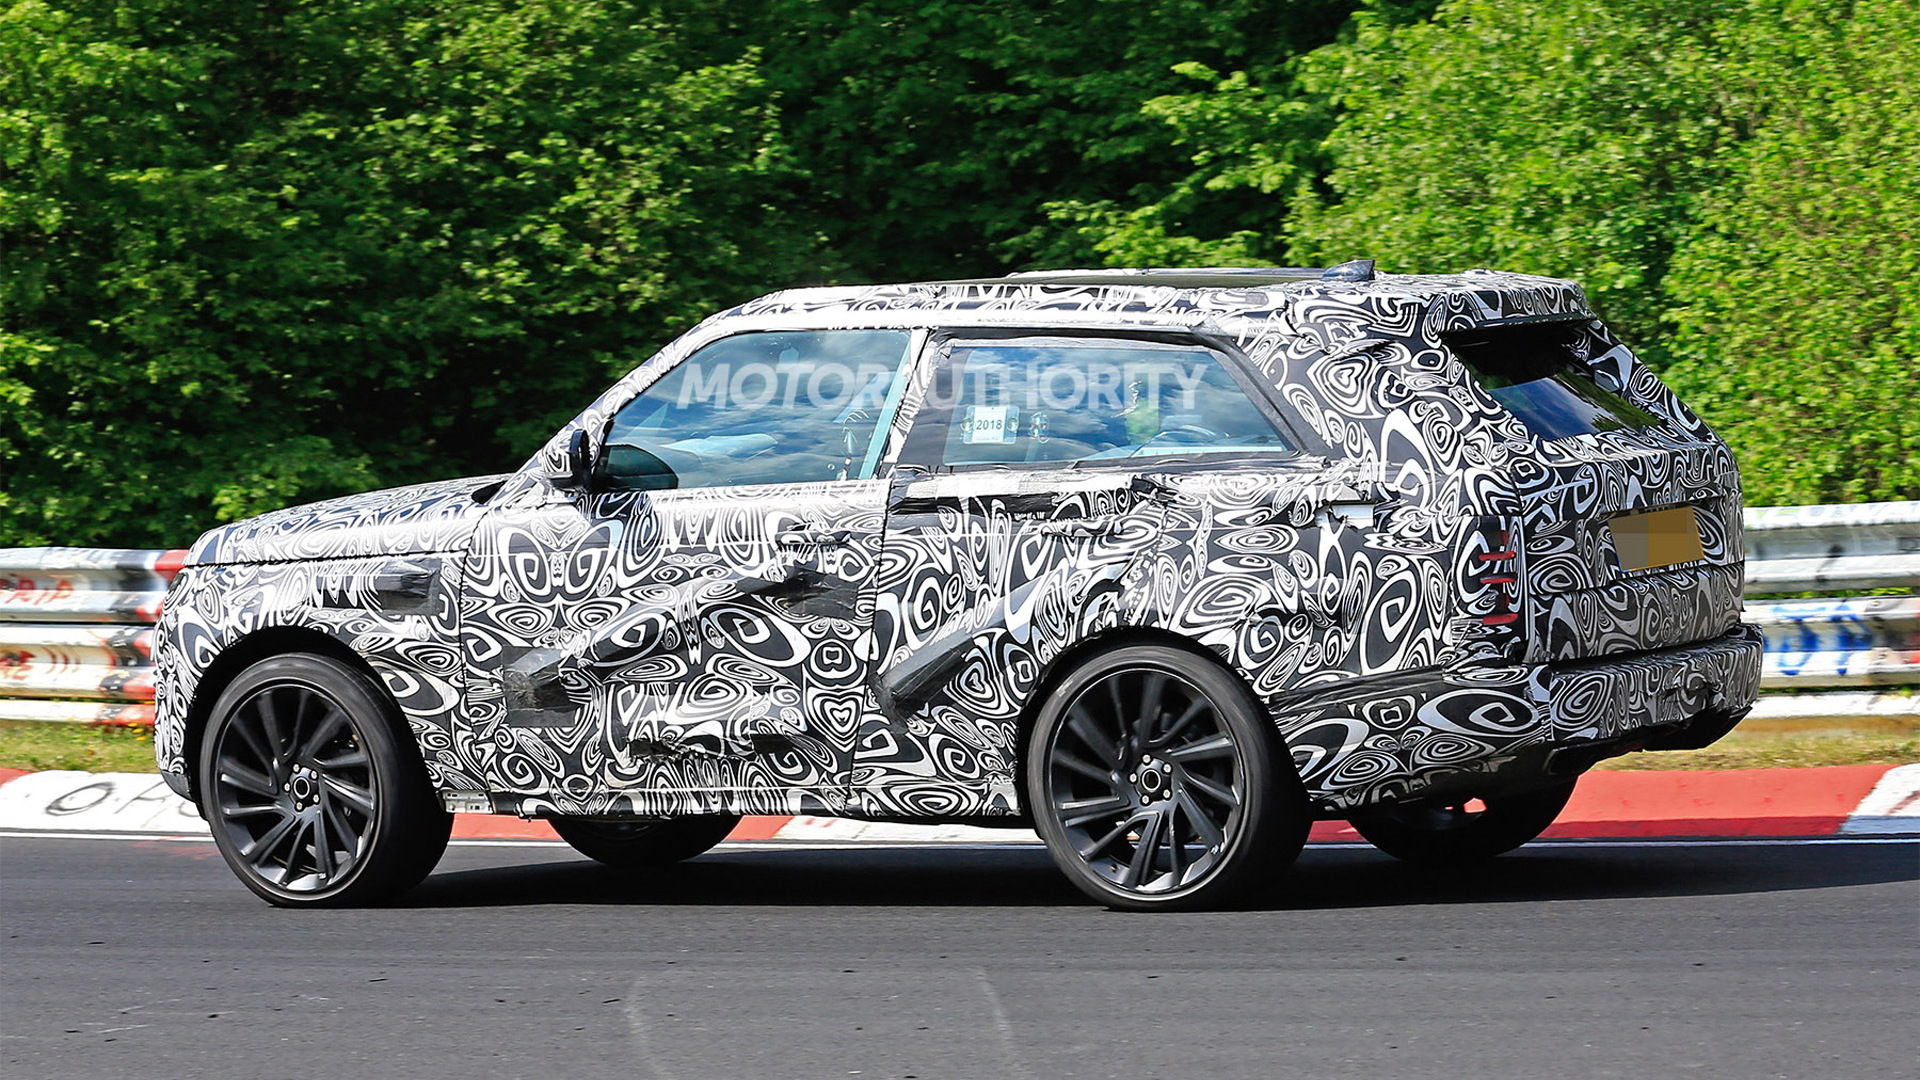 2019 Land Rover Range Rover SV Coupe undergoes final testing at the Nürburgring